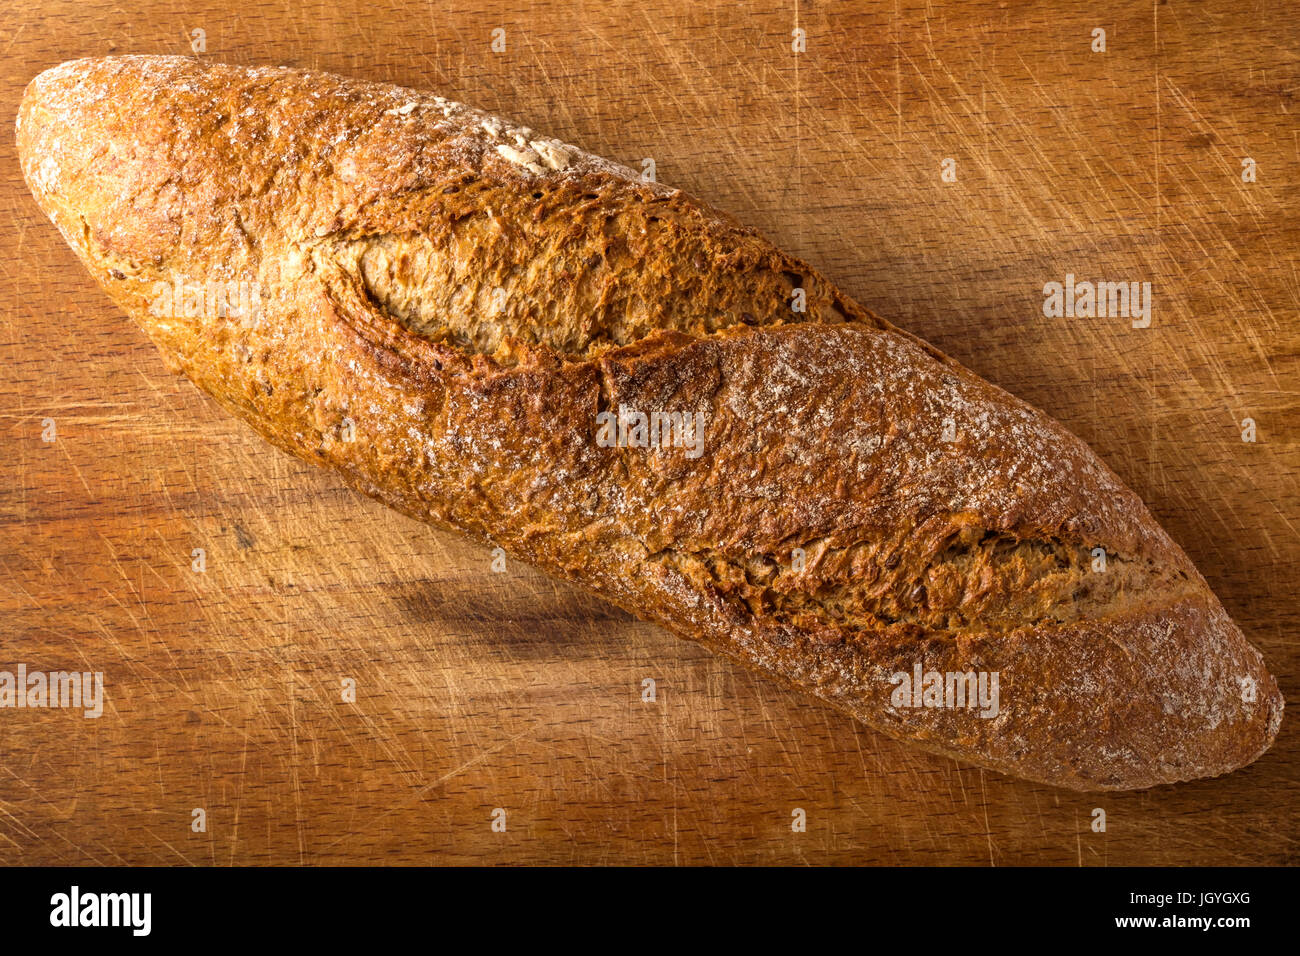 Brown baguette with different seeds, such as sesame and poppy, on wooden background Stock Photo